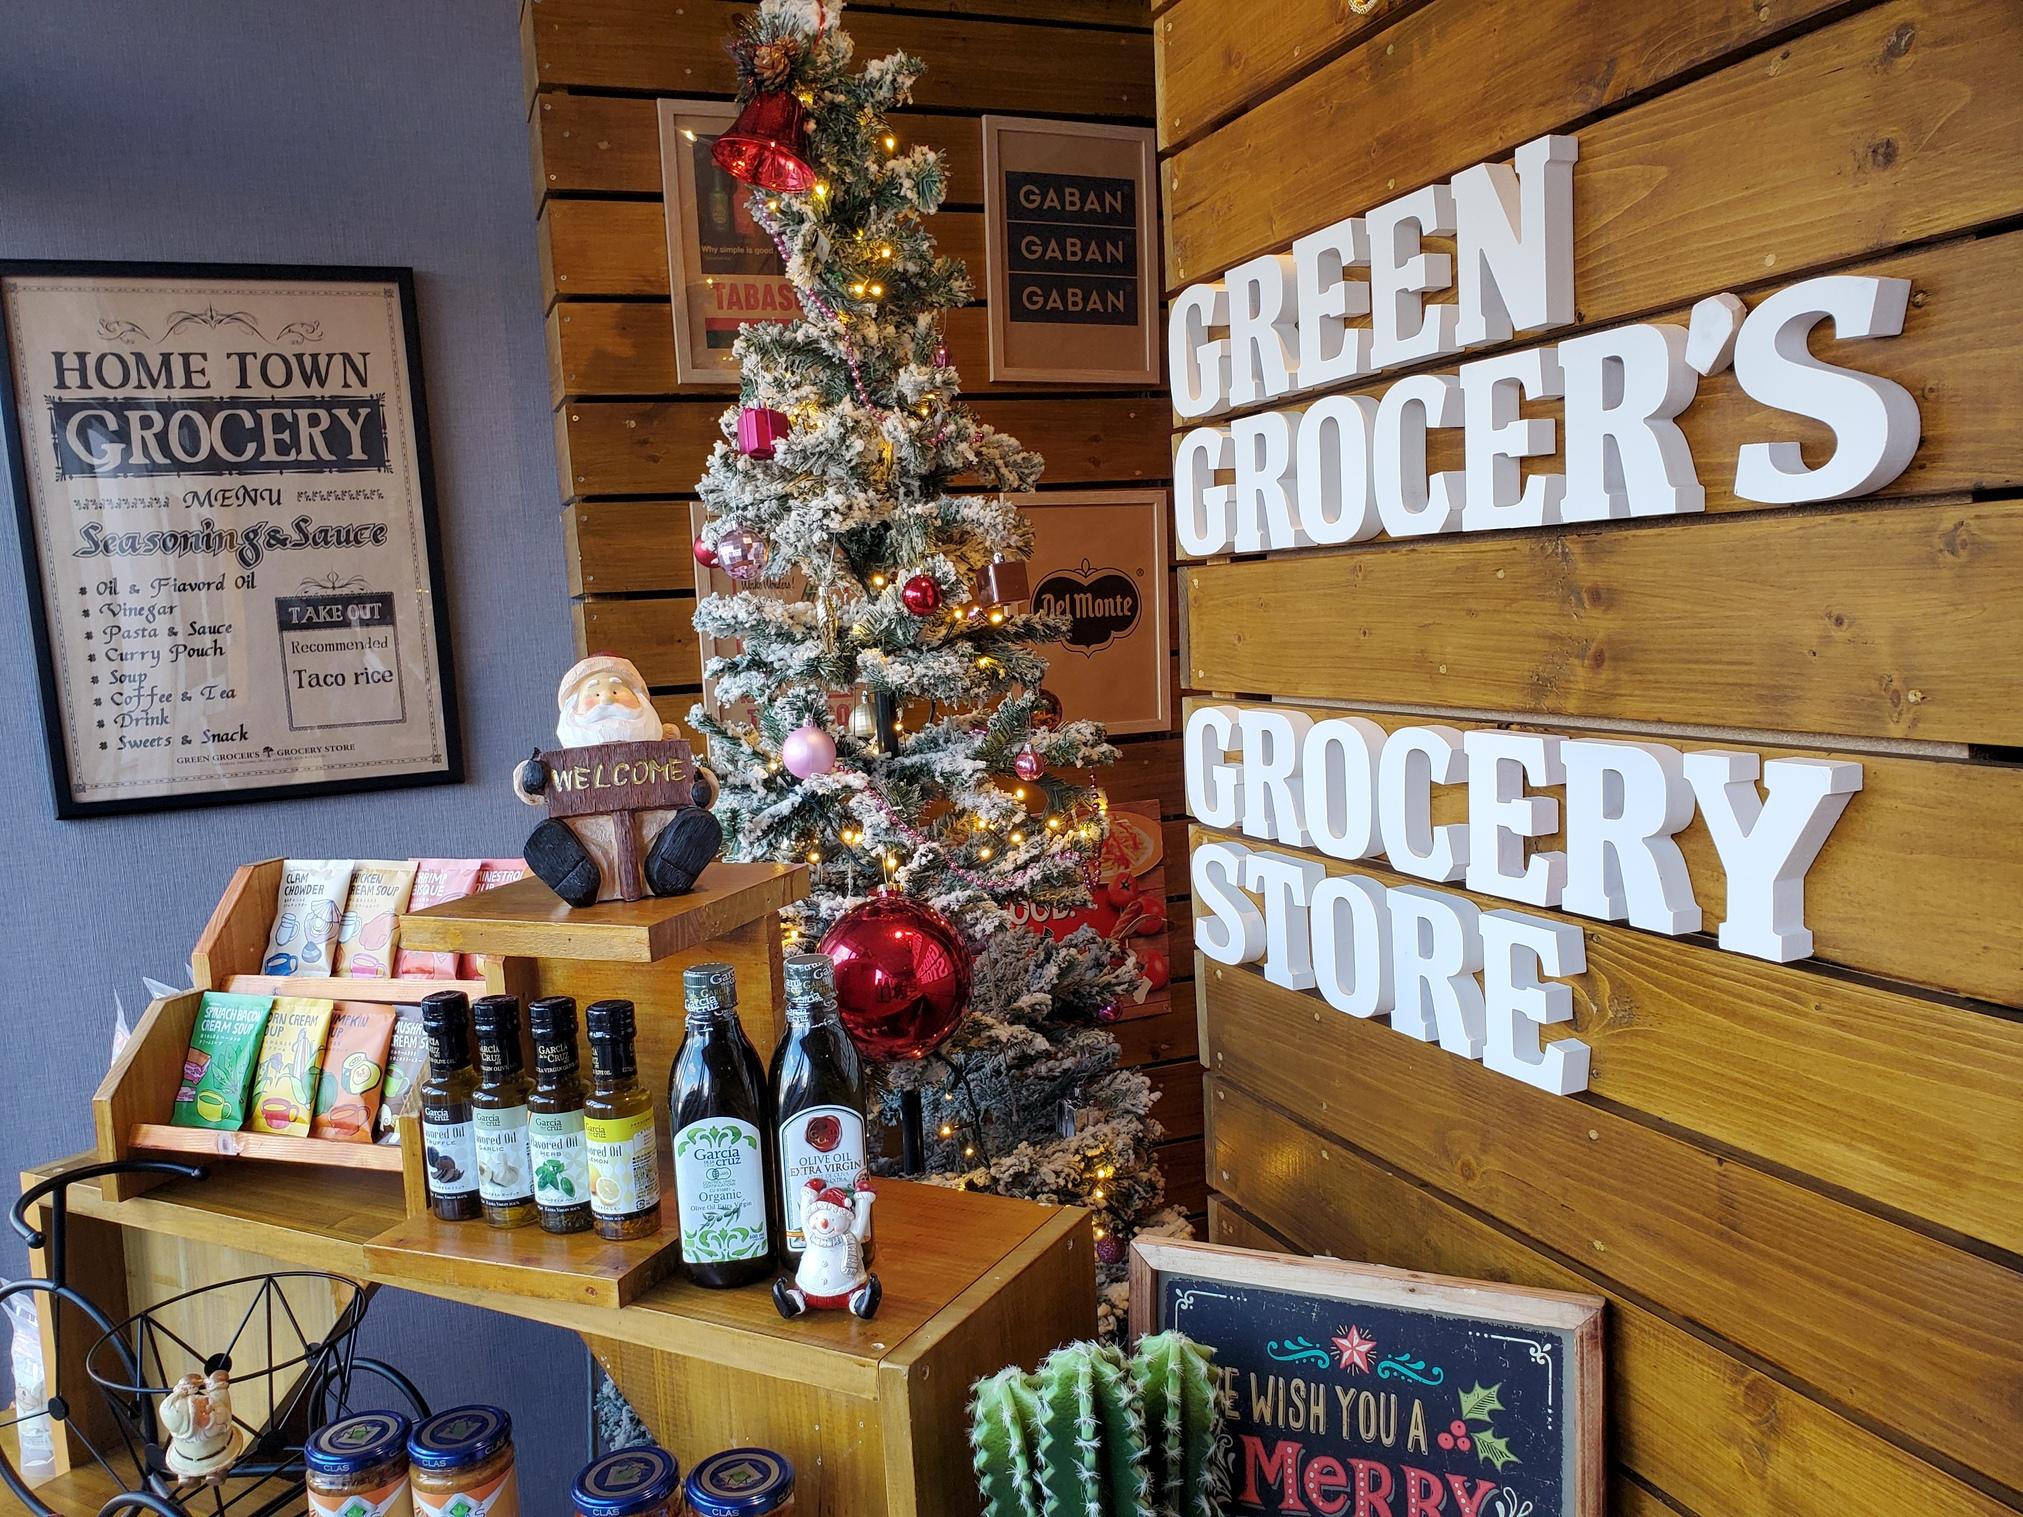 GREEN　GROCER‘S　GROCERY　STORE